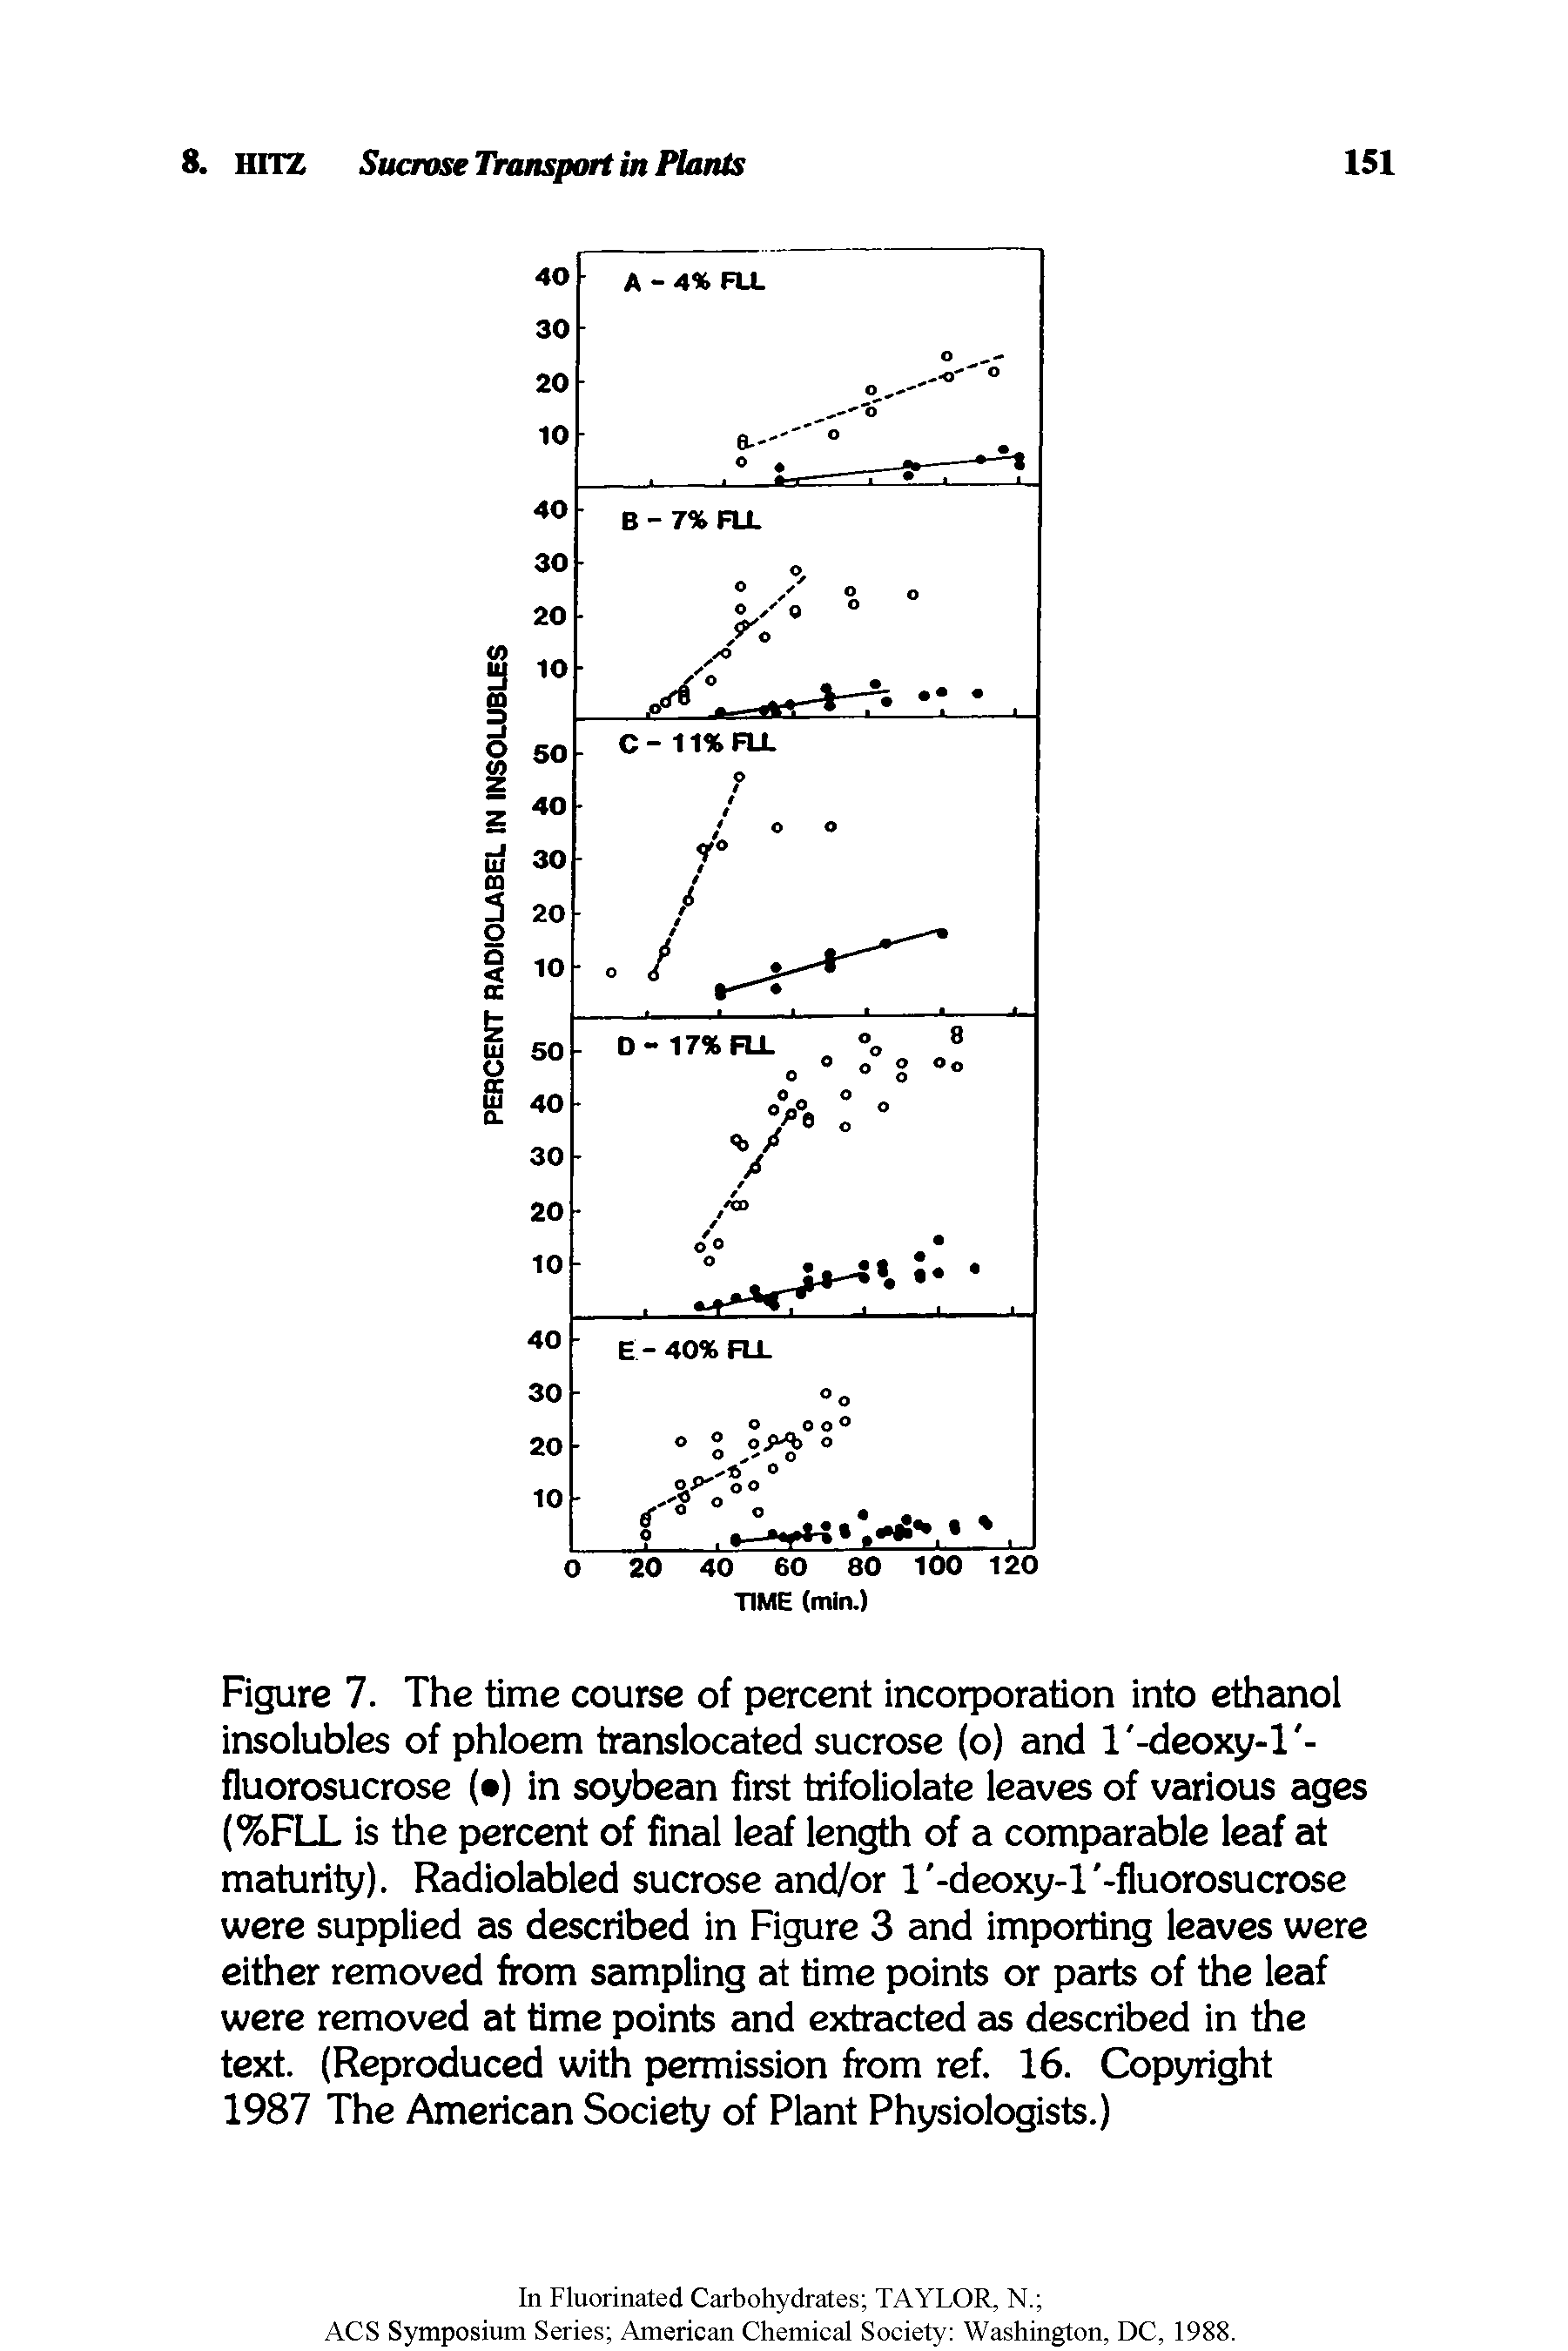 Figure 7. The time course of percent incorporation into ethanol insolubles of phloem translocated sucrose (o) and I -deoxy-l -fluorosucrose ( ) in soybean first trifoliolate leaves of various ages (%FLL is the percent of final leaf length of a comparable leaf at maturity). Radiolabled sucrose and/or 1 -deoxy-1 -fluorosucrose were supplied as described in Figure 3 and importing leaves were either removed from sampling at time points or parts of the leaf were removed at time points and extracted as described in the text. (Reproduced with permission from ref. 16. Copyright 1987 The American Society of Plant Physiologists.)...